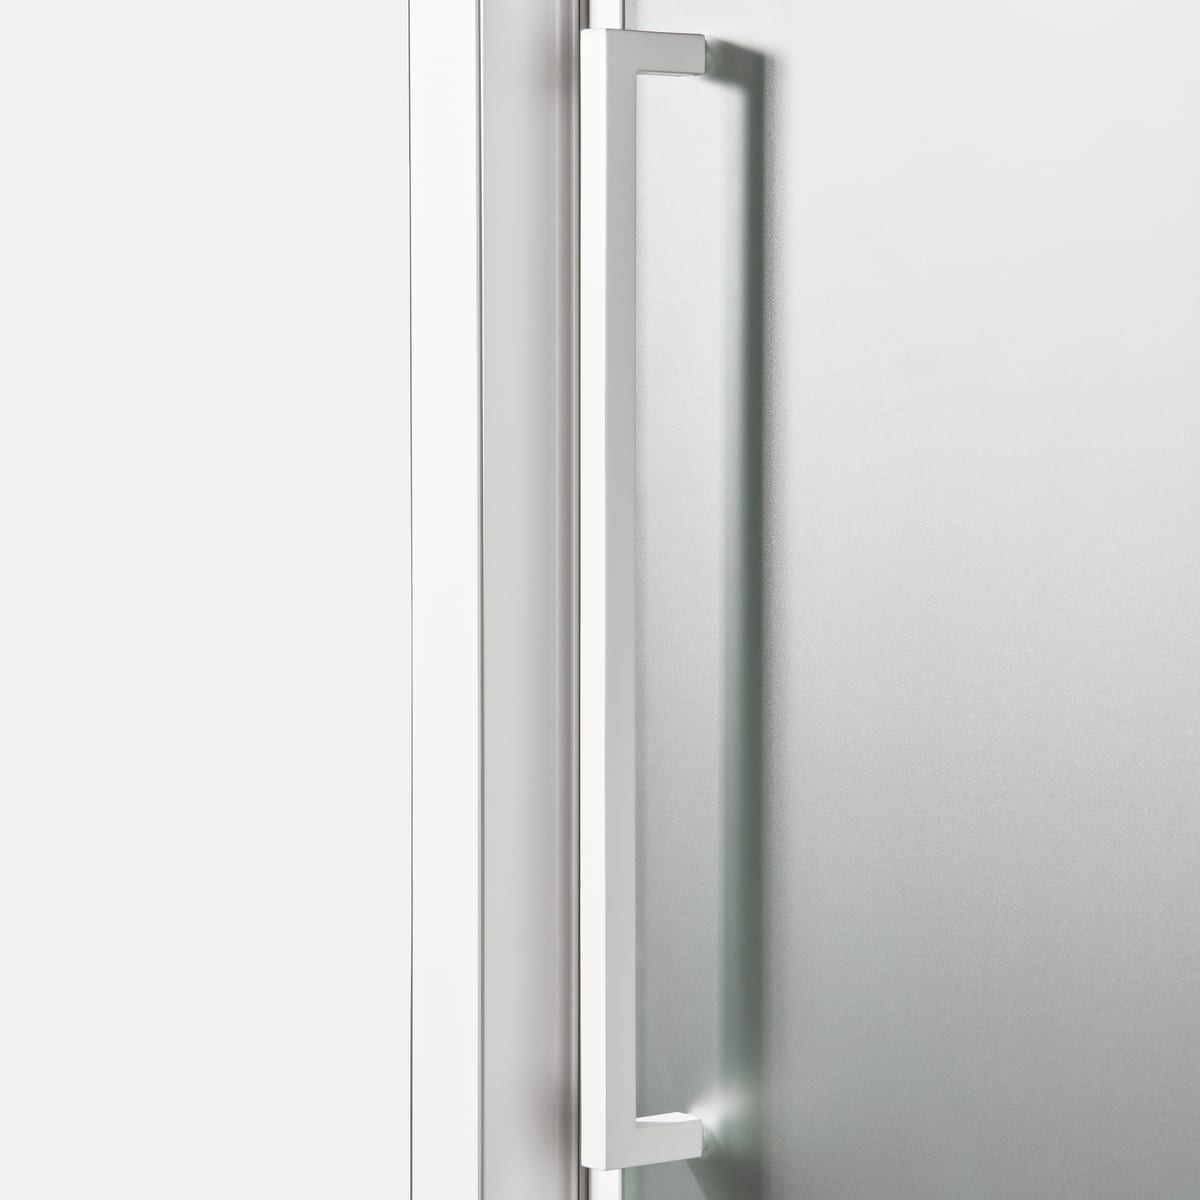 RECORD HINGED DOOR L 87-91 H 195 CM SCREEN-PRINTED GLASS 6 MM WHITE